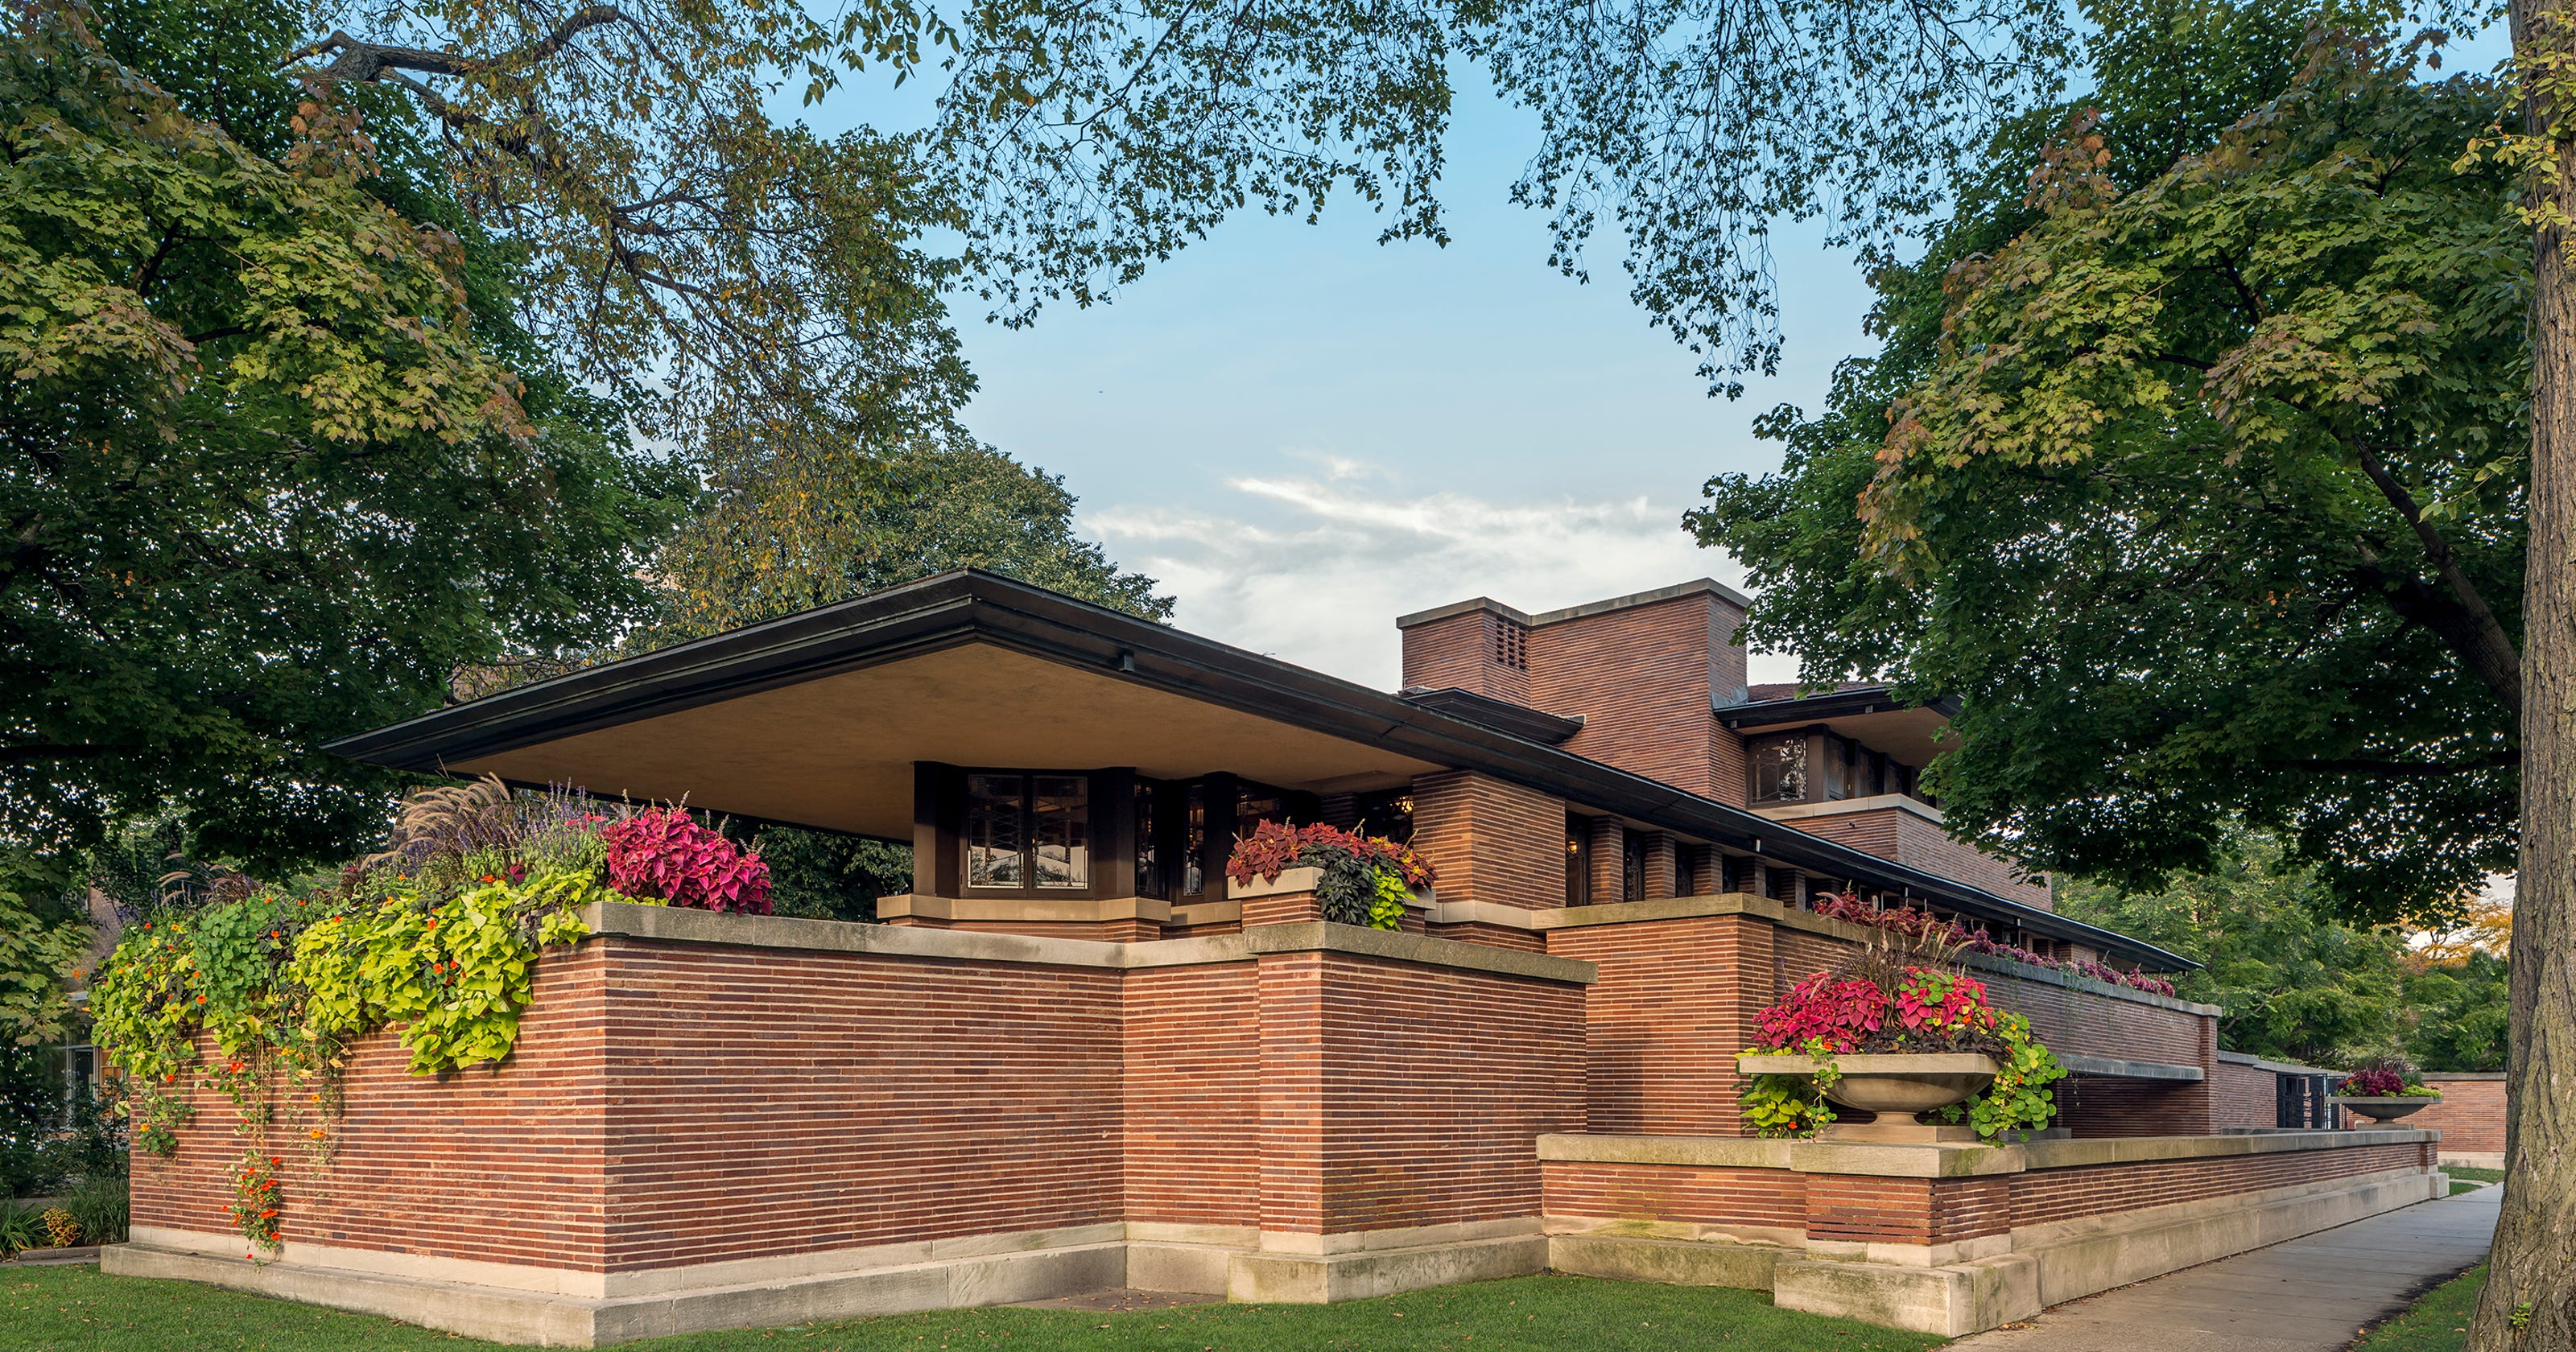 Frank Lloyd Wright-designed Robie House in Chicago’s Hyde Park is now a